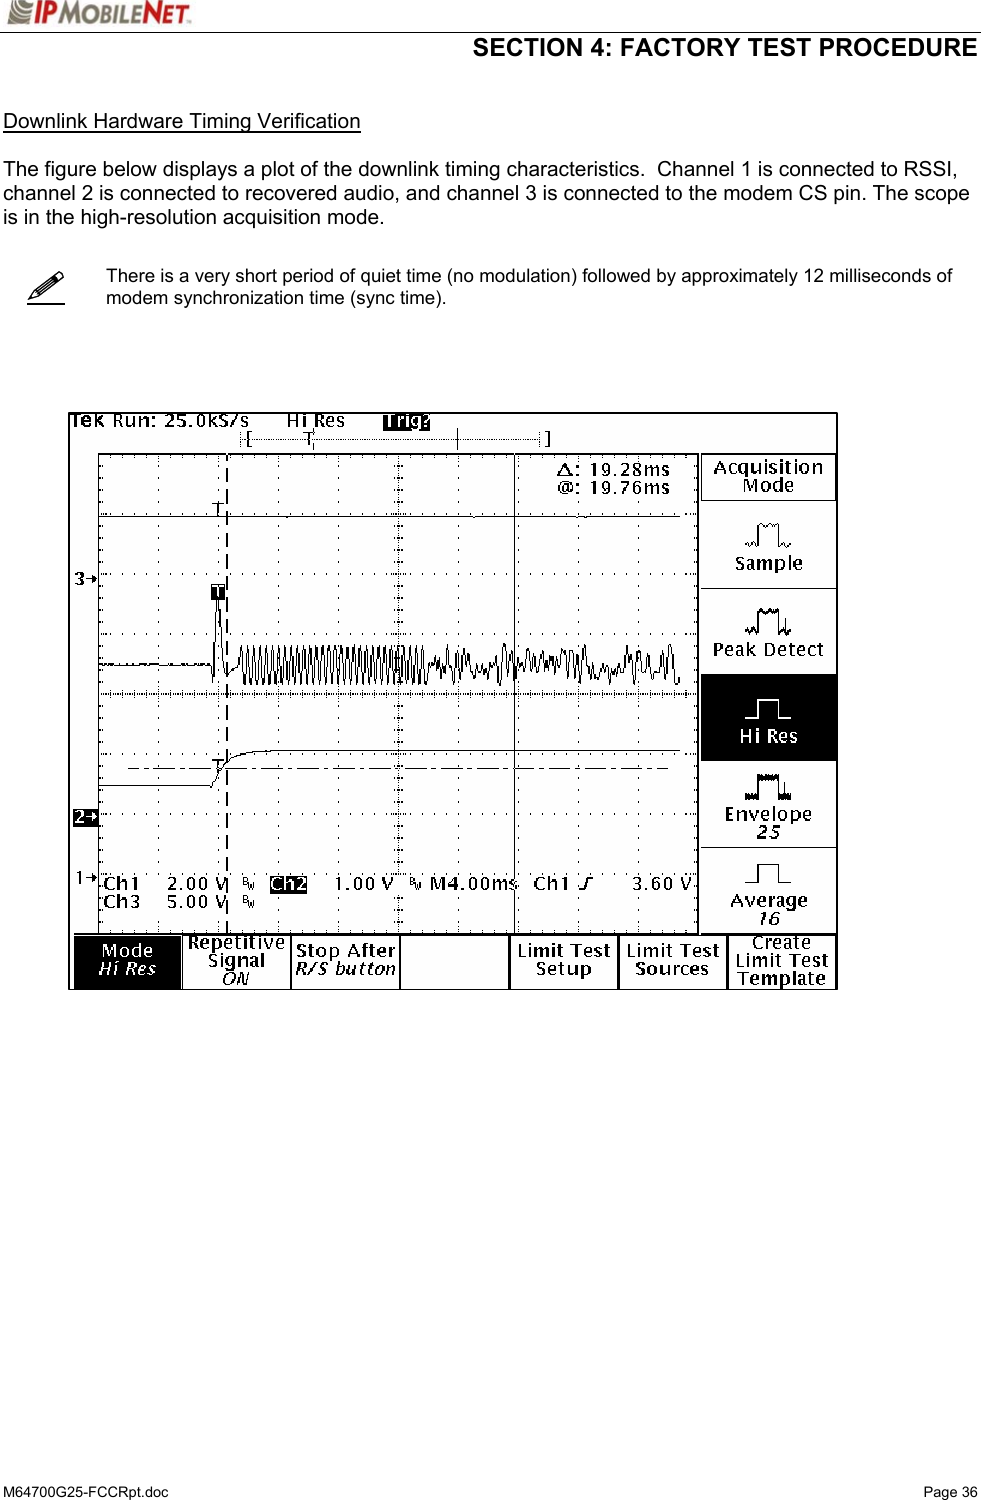  SECTION 4: FACTORY TEST PROCEDURE  M64700G25-FCCRpt.doc   Page 36    Downlink Hardware Timing Verification  The figure below displays a plot of the downlink timing characteristics.  Channel 1 is connected to RSSI, channel 2 is connected to recovered audio, and channel 3 is connected to the modem CS pin. The scope is in the high-resolution acquisition mode.      There is a very short period of quiet time (no modulation) followed by approximately 12 milliseconds of modem synchronization time (sync time).          